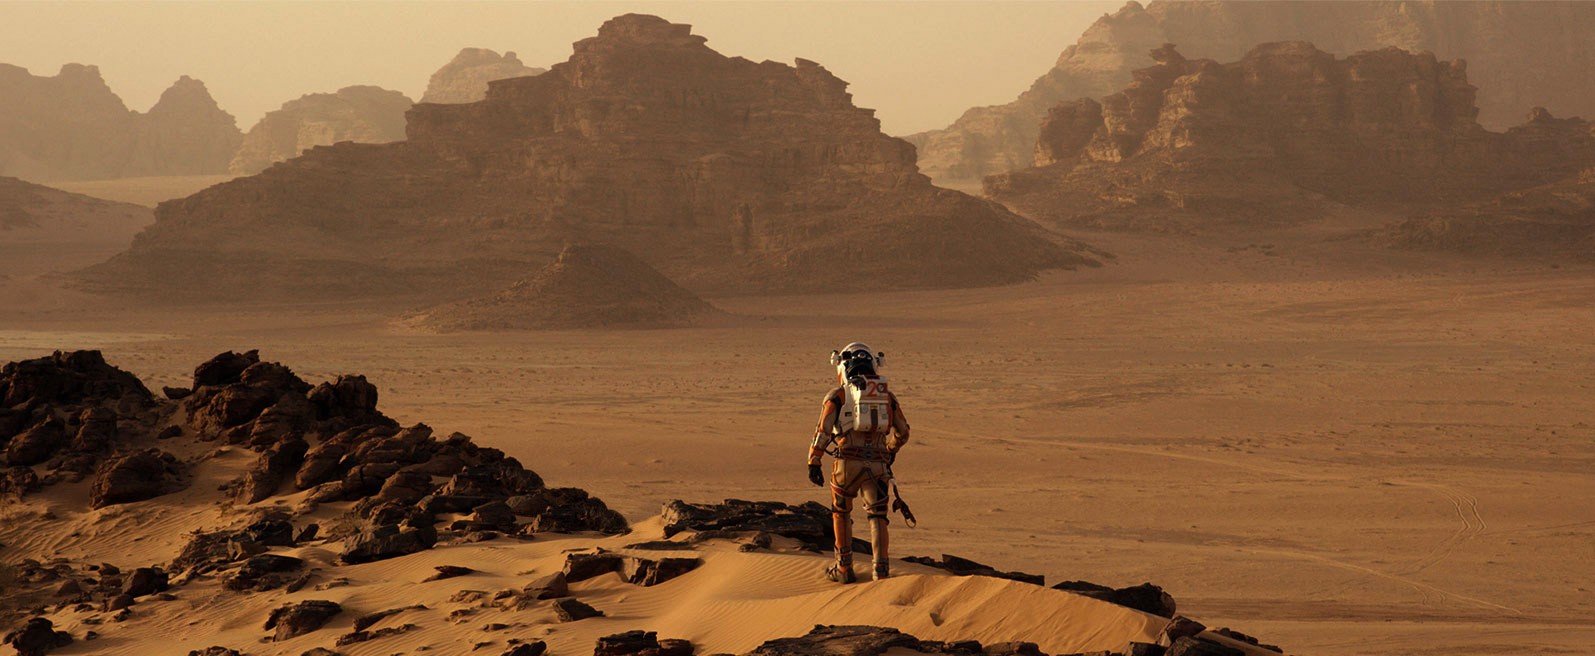 Does 'The Martian' Movie Do the Book Justice? Yes. Yes, It Does | Space